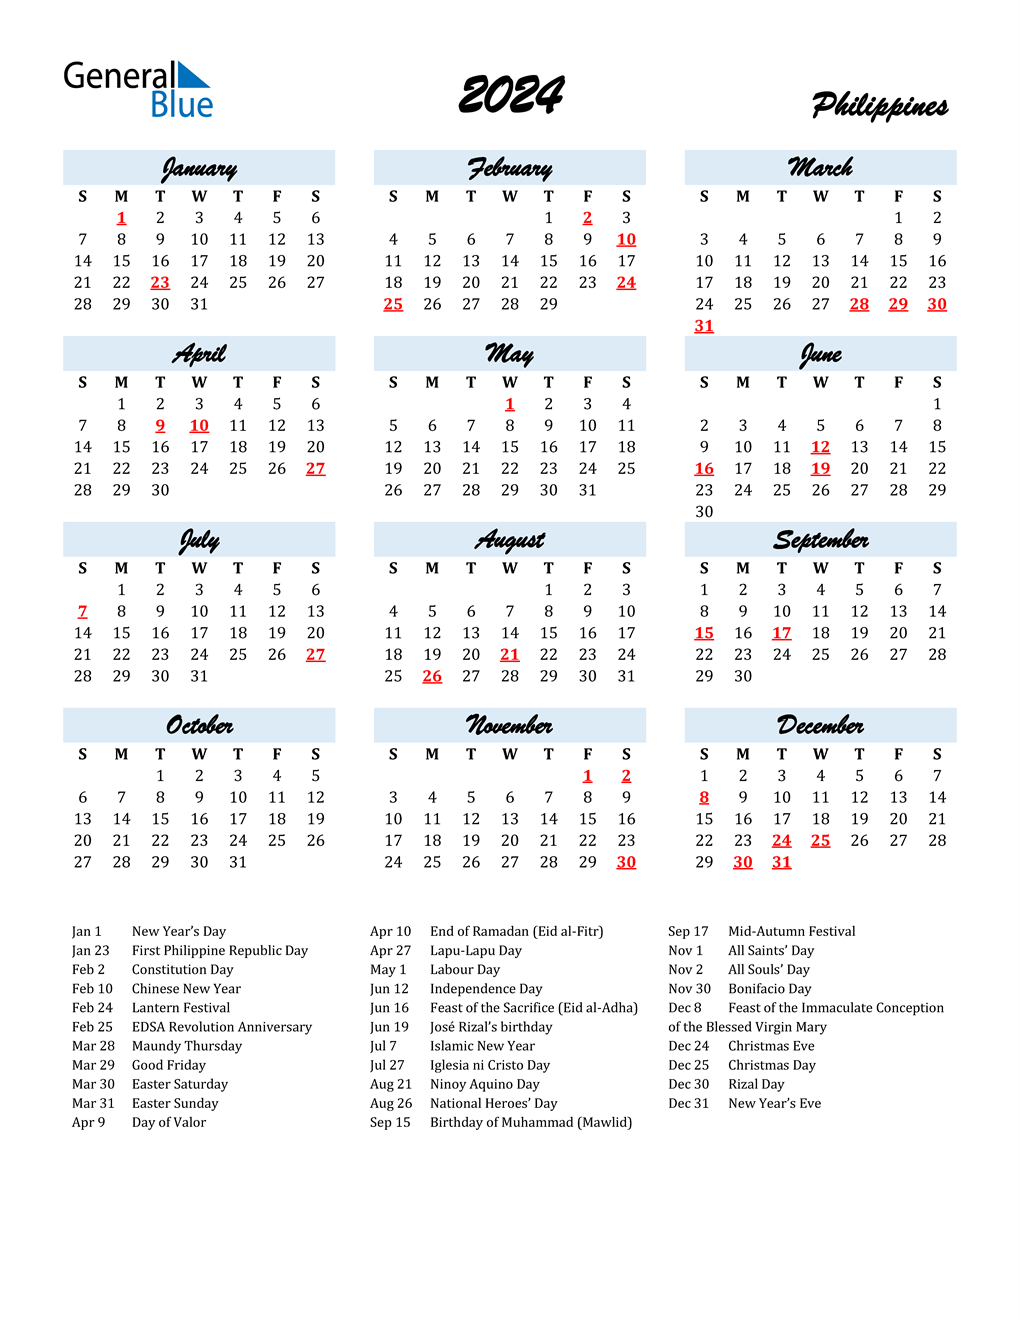 2024-philippines-calendar-with-holidays